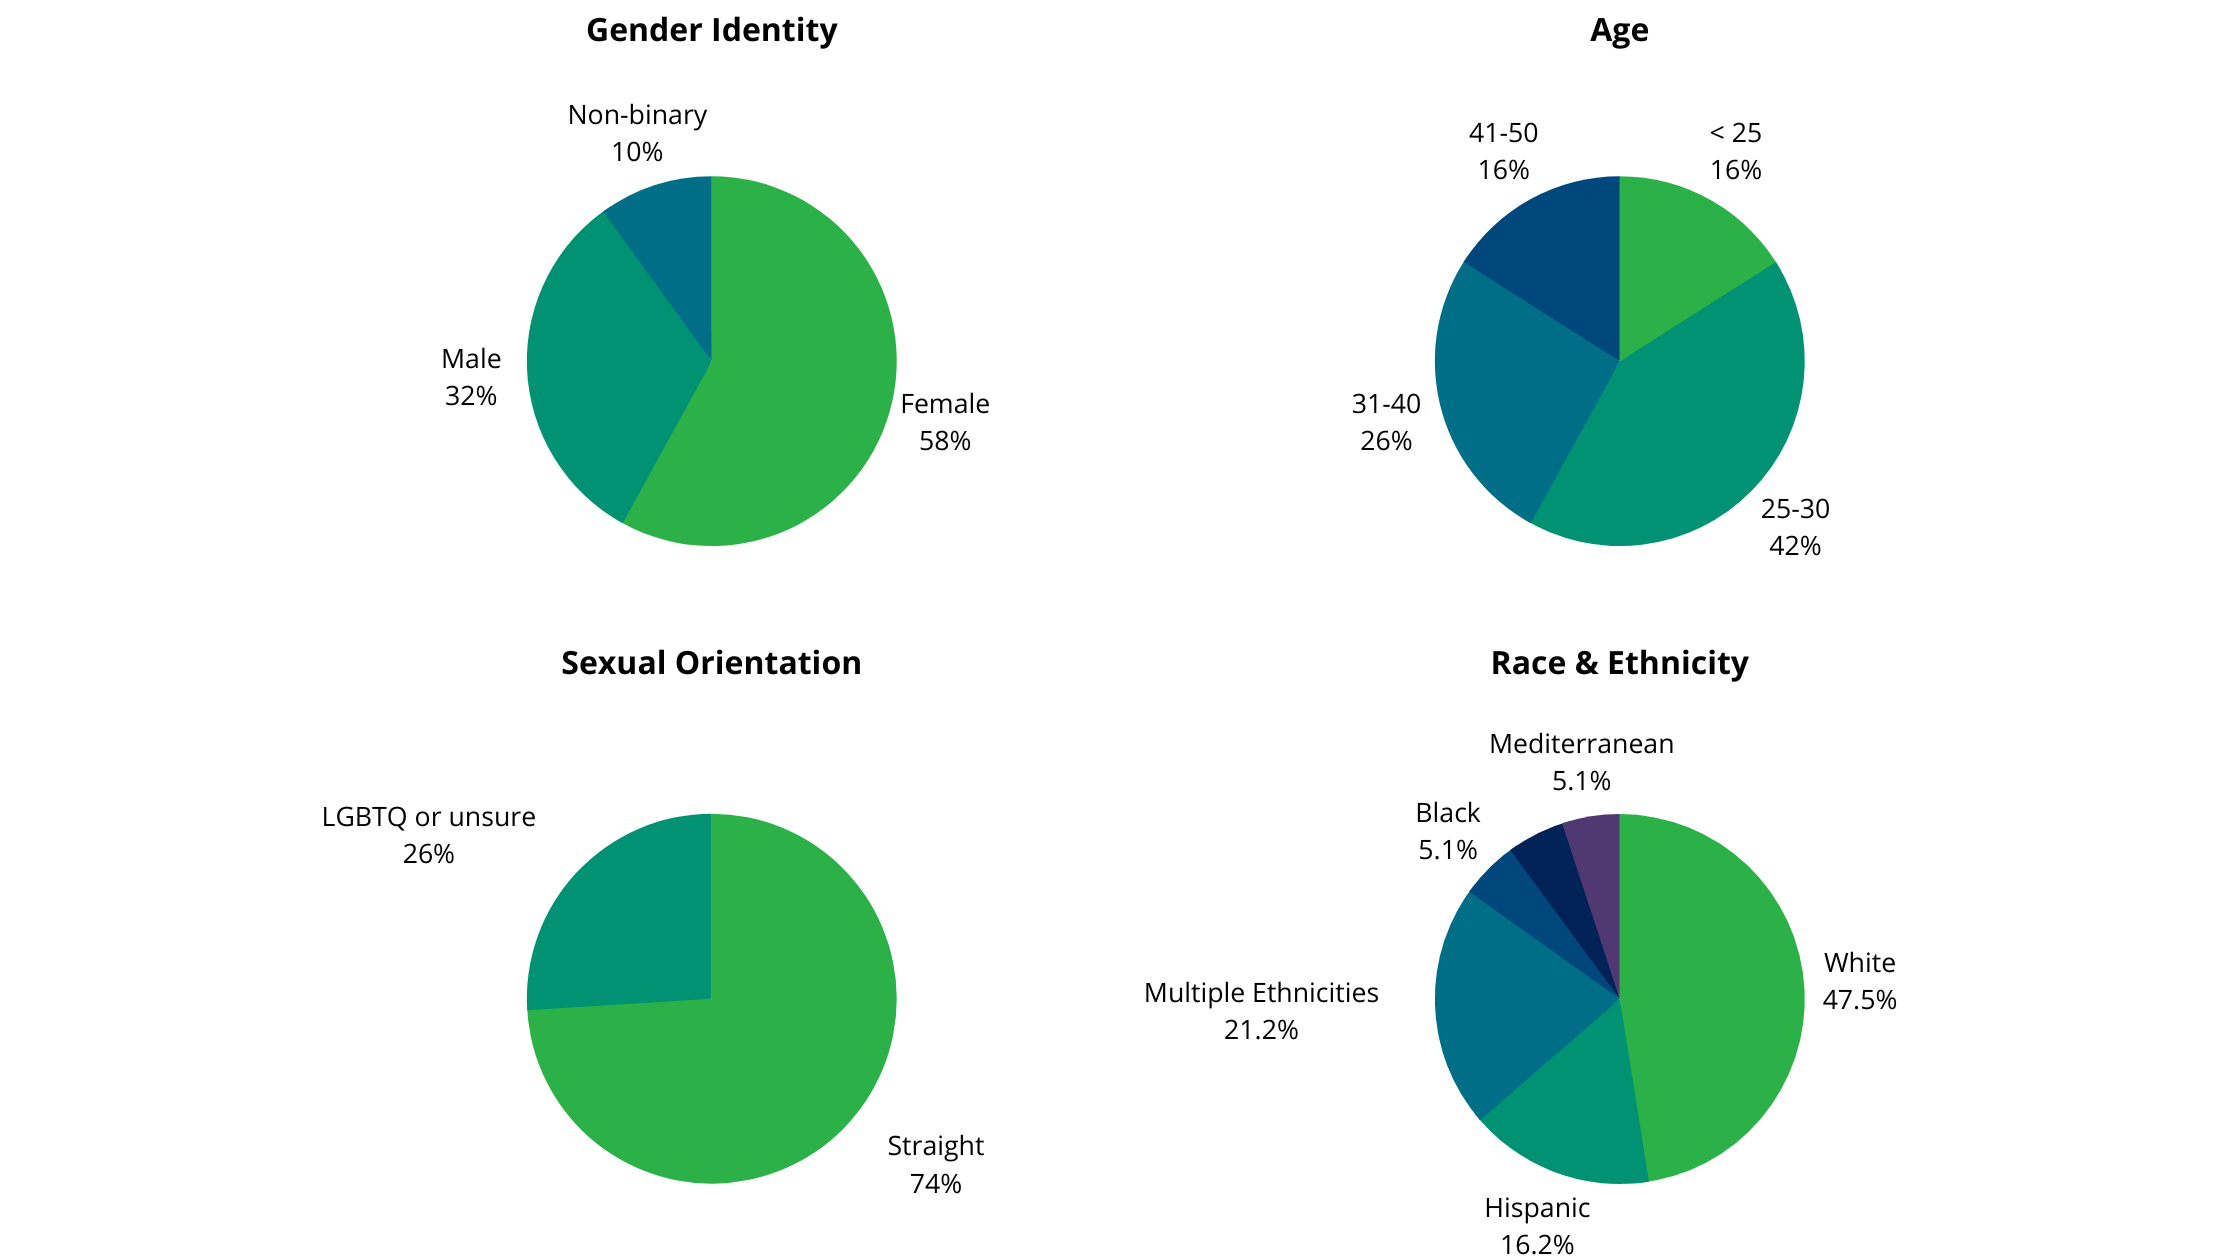 Mapistry gender identity - 32% male, 58% female, 10% non-binary. Mapistry sexual orientation - 26% LGBTQ or unsure, 74% straight. Age - 16% under 25, 42% 25-30 years, 26% 31-40, 16% 41-50. Race & ethnicity - 47.5% white, 16.2% Hispanic, 21.2% multiple ethnicities, 5.1% black, 5.1% Mediterranean, 5% Asian.